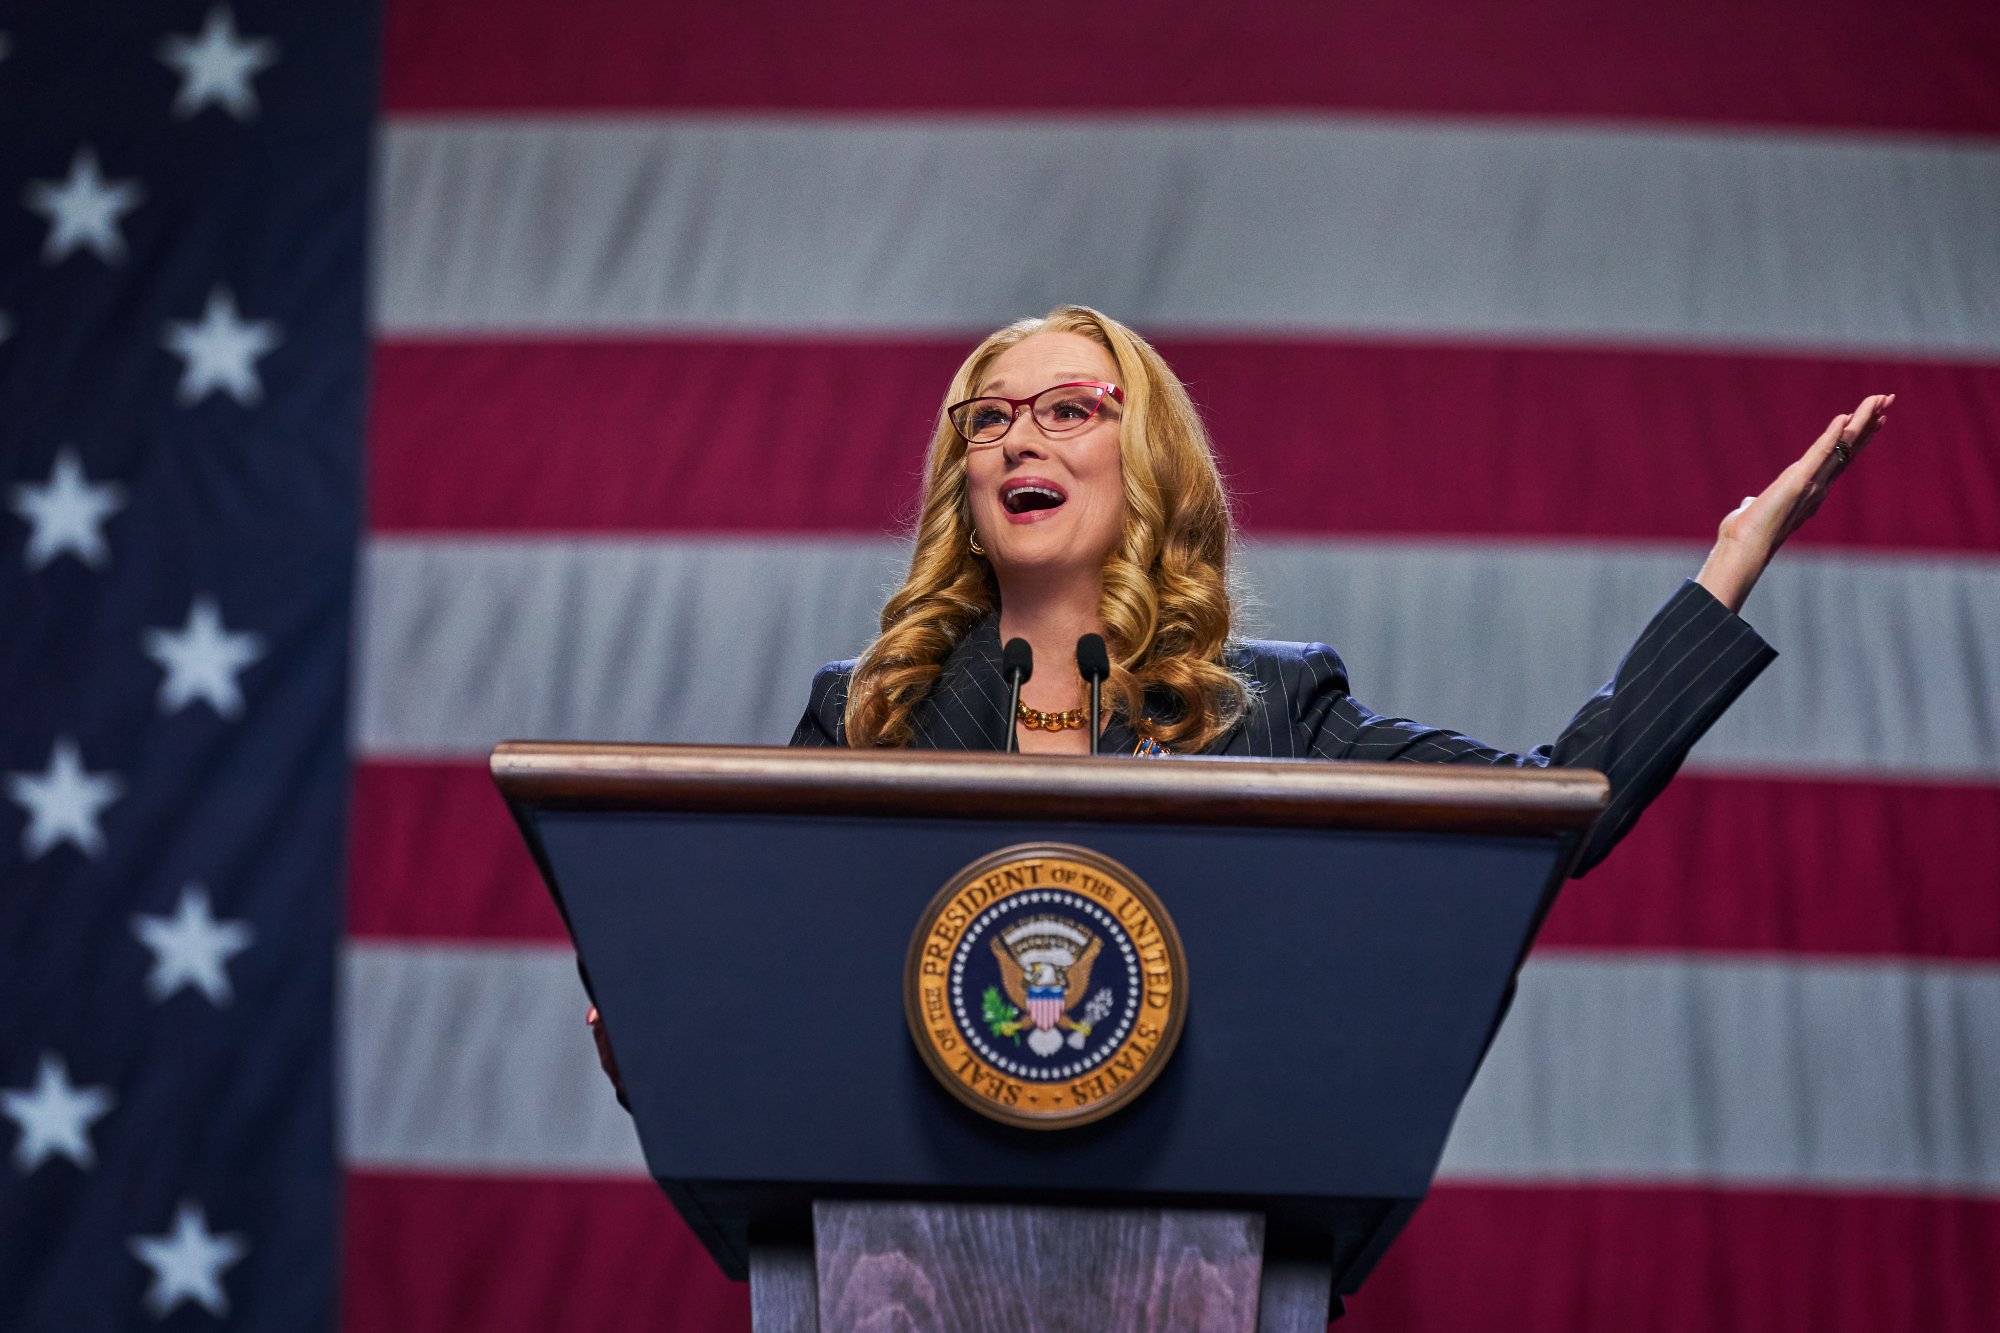 'Don't Look Up' post-credits featuring Meryl Streep as President Janie Orlean standing behind a podium with the American flag behind her